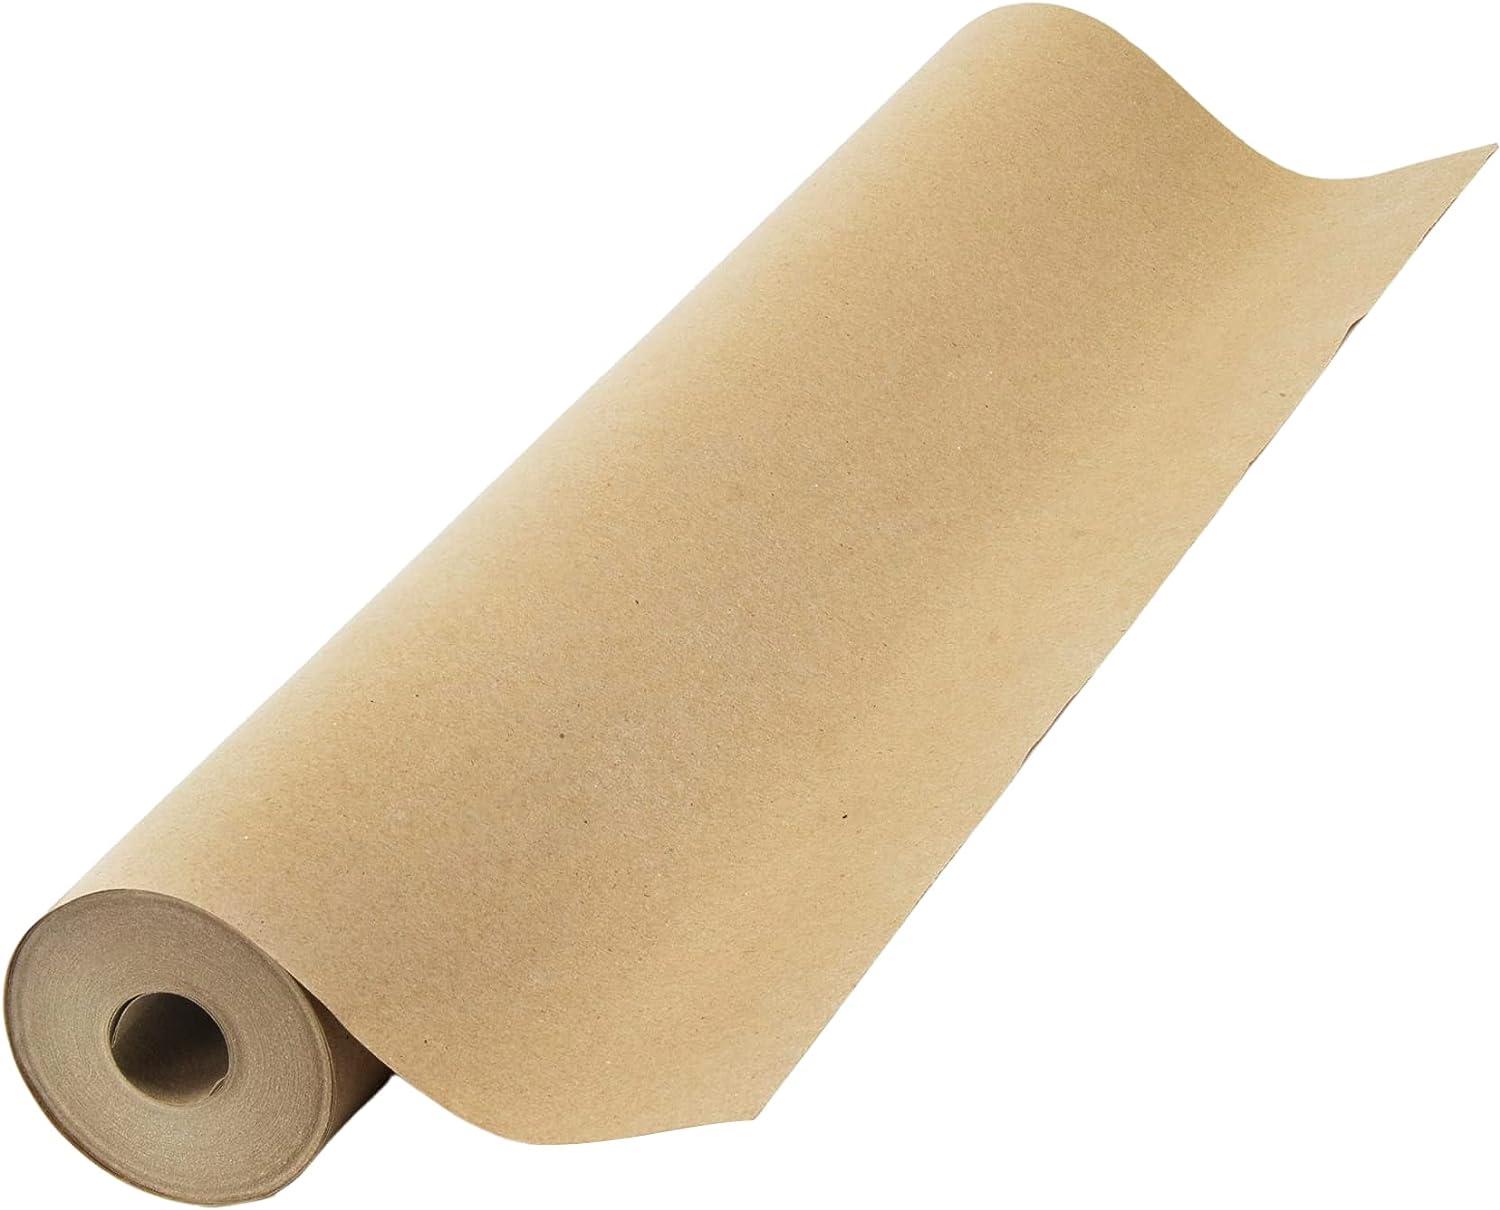 Large Brown Kraft Paper Roll - 36 x 1200 (100 ft) - Made in USA - Ideal for Gift Wrapping, Packing, Moving, Postal, Shipping, Parcel, Wall Art